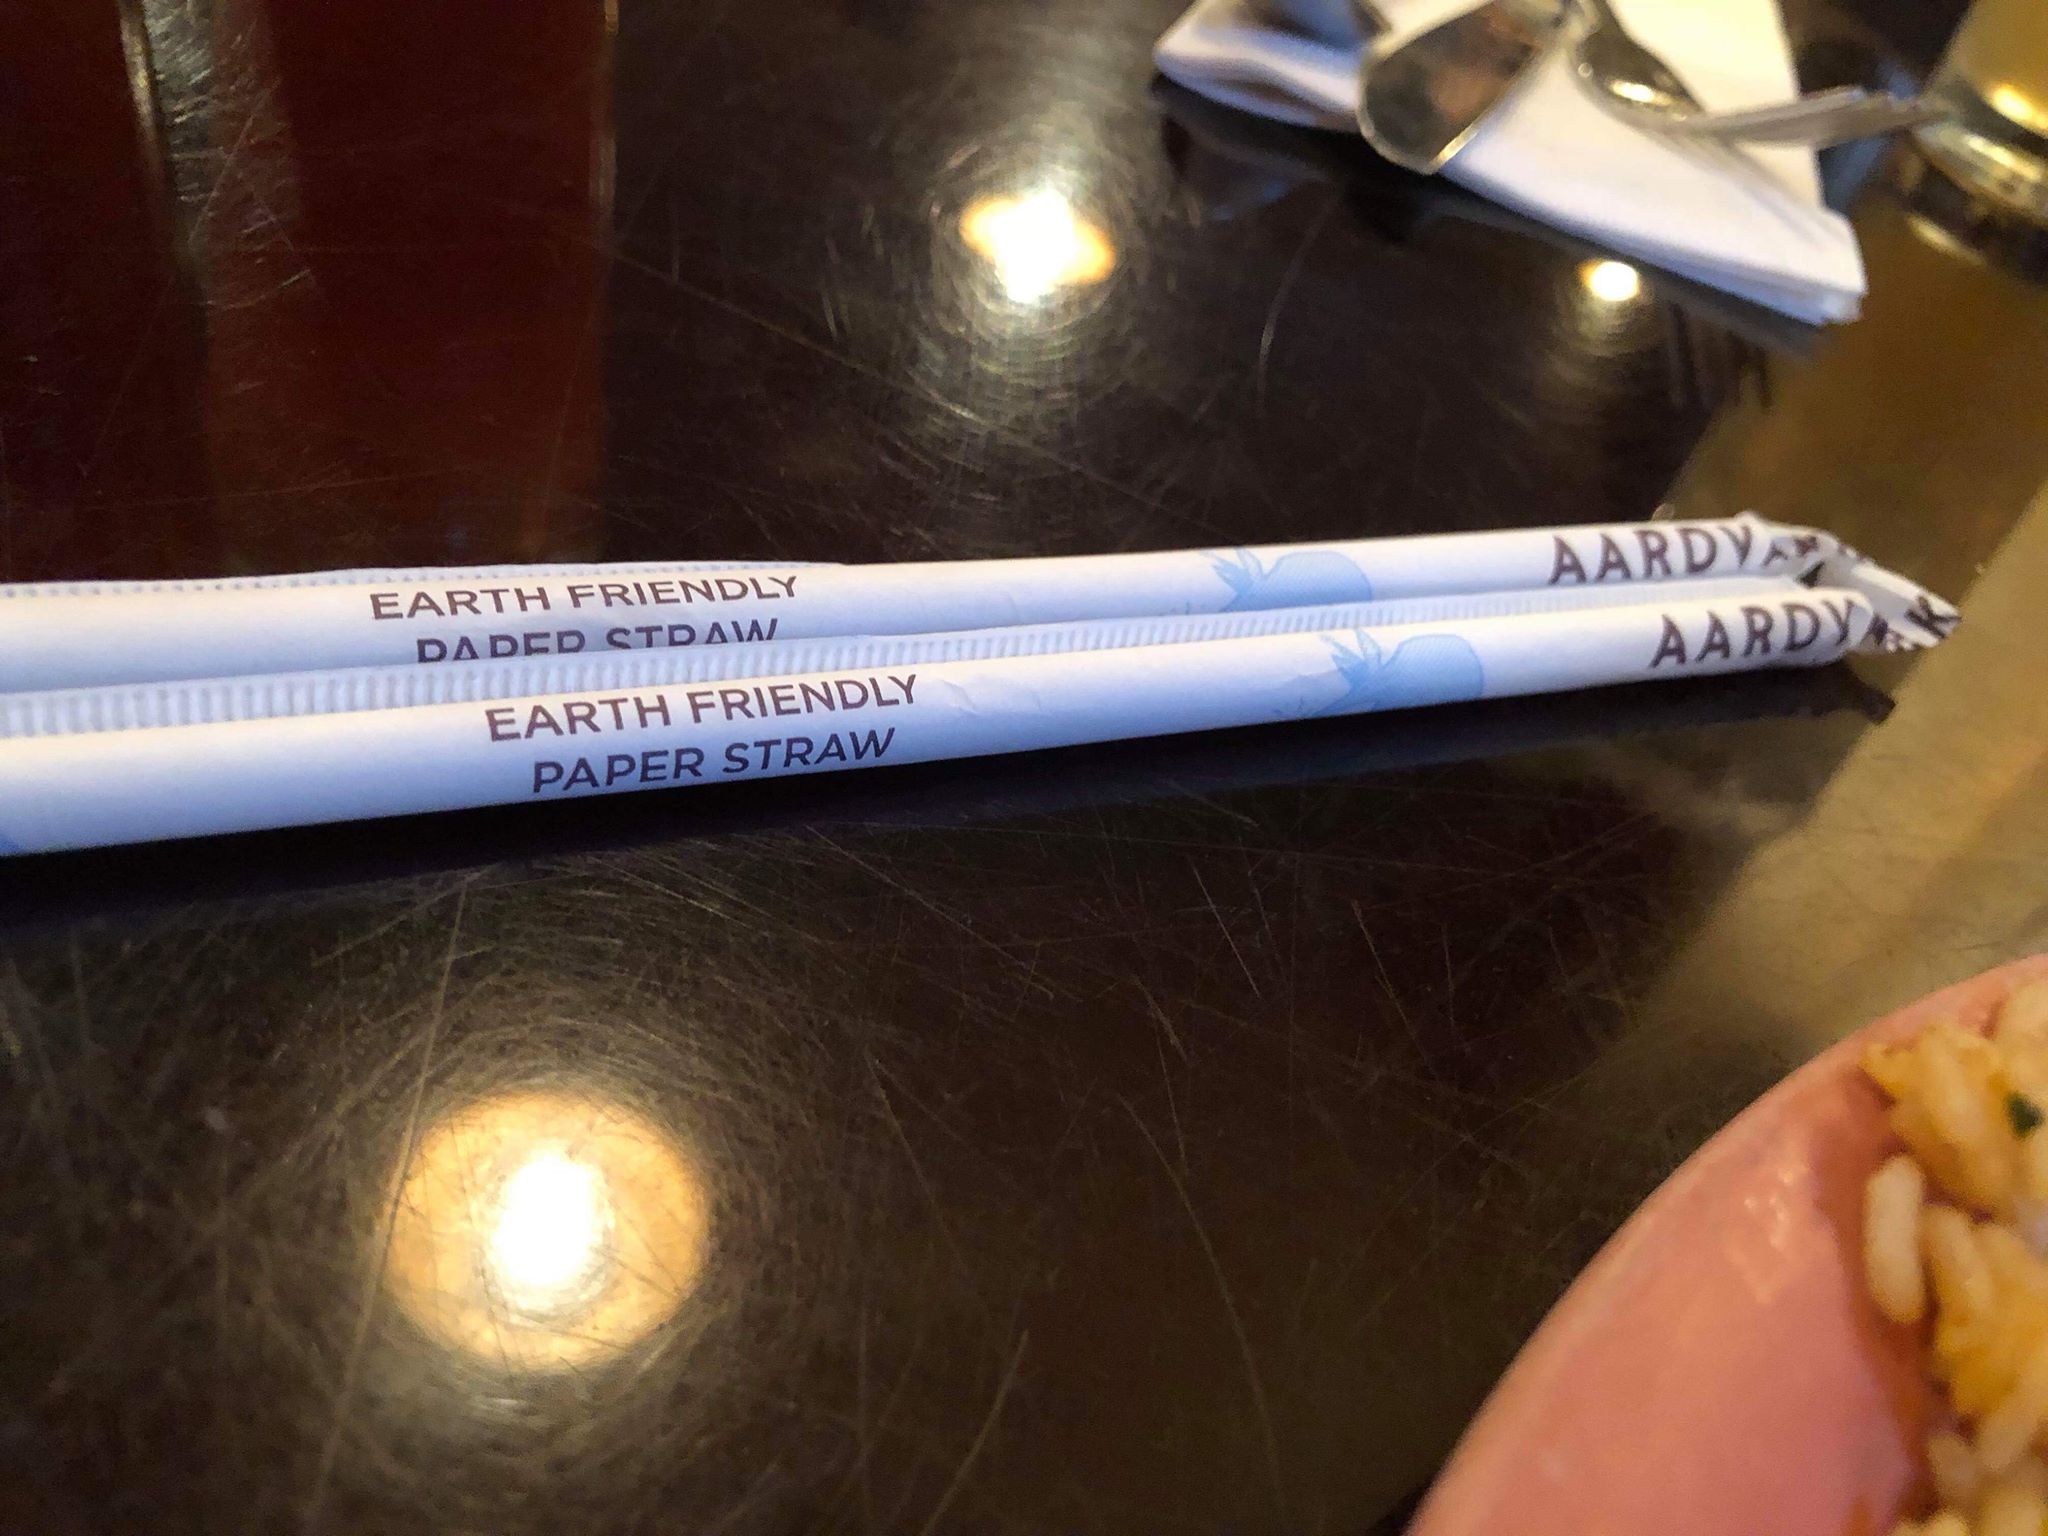 Disney Expands Environmental Commitment By Getting Rid of Plastic Straws